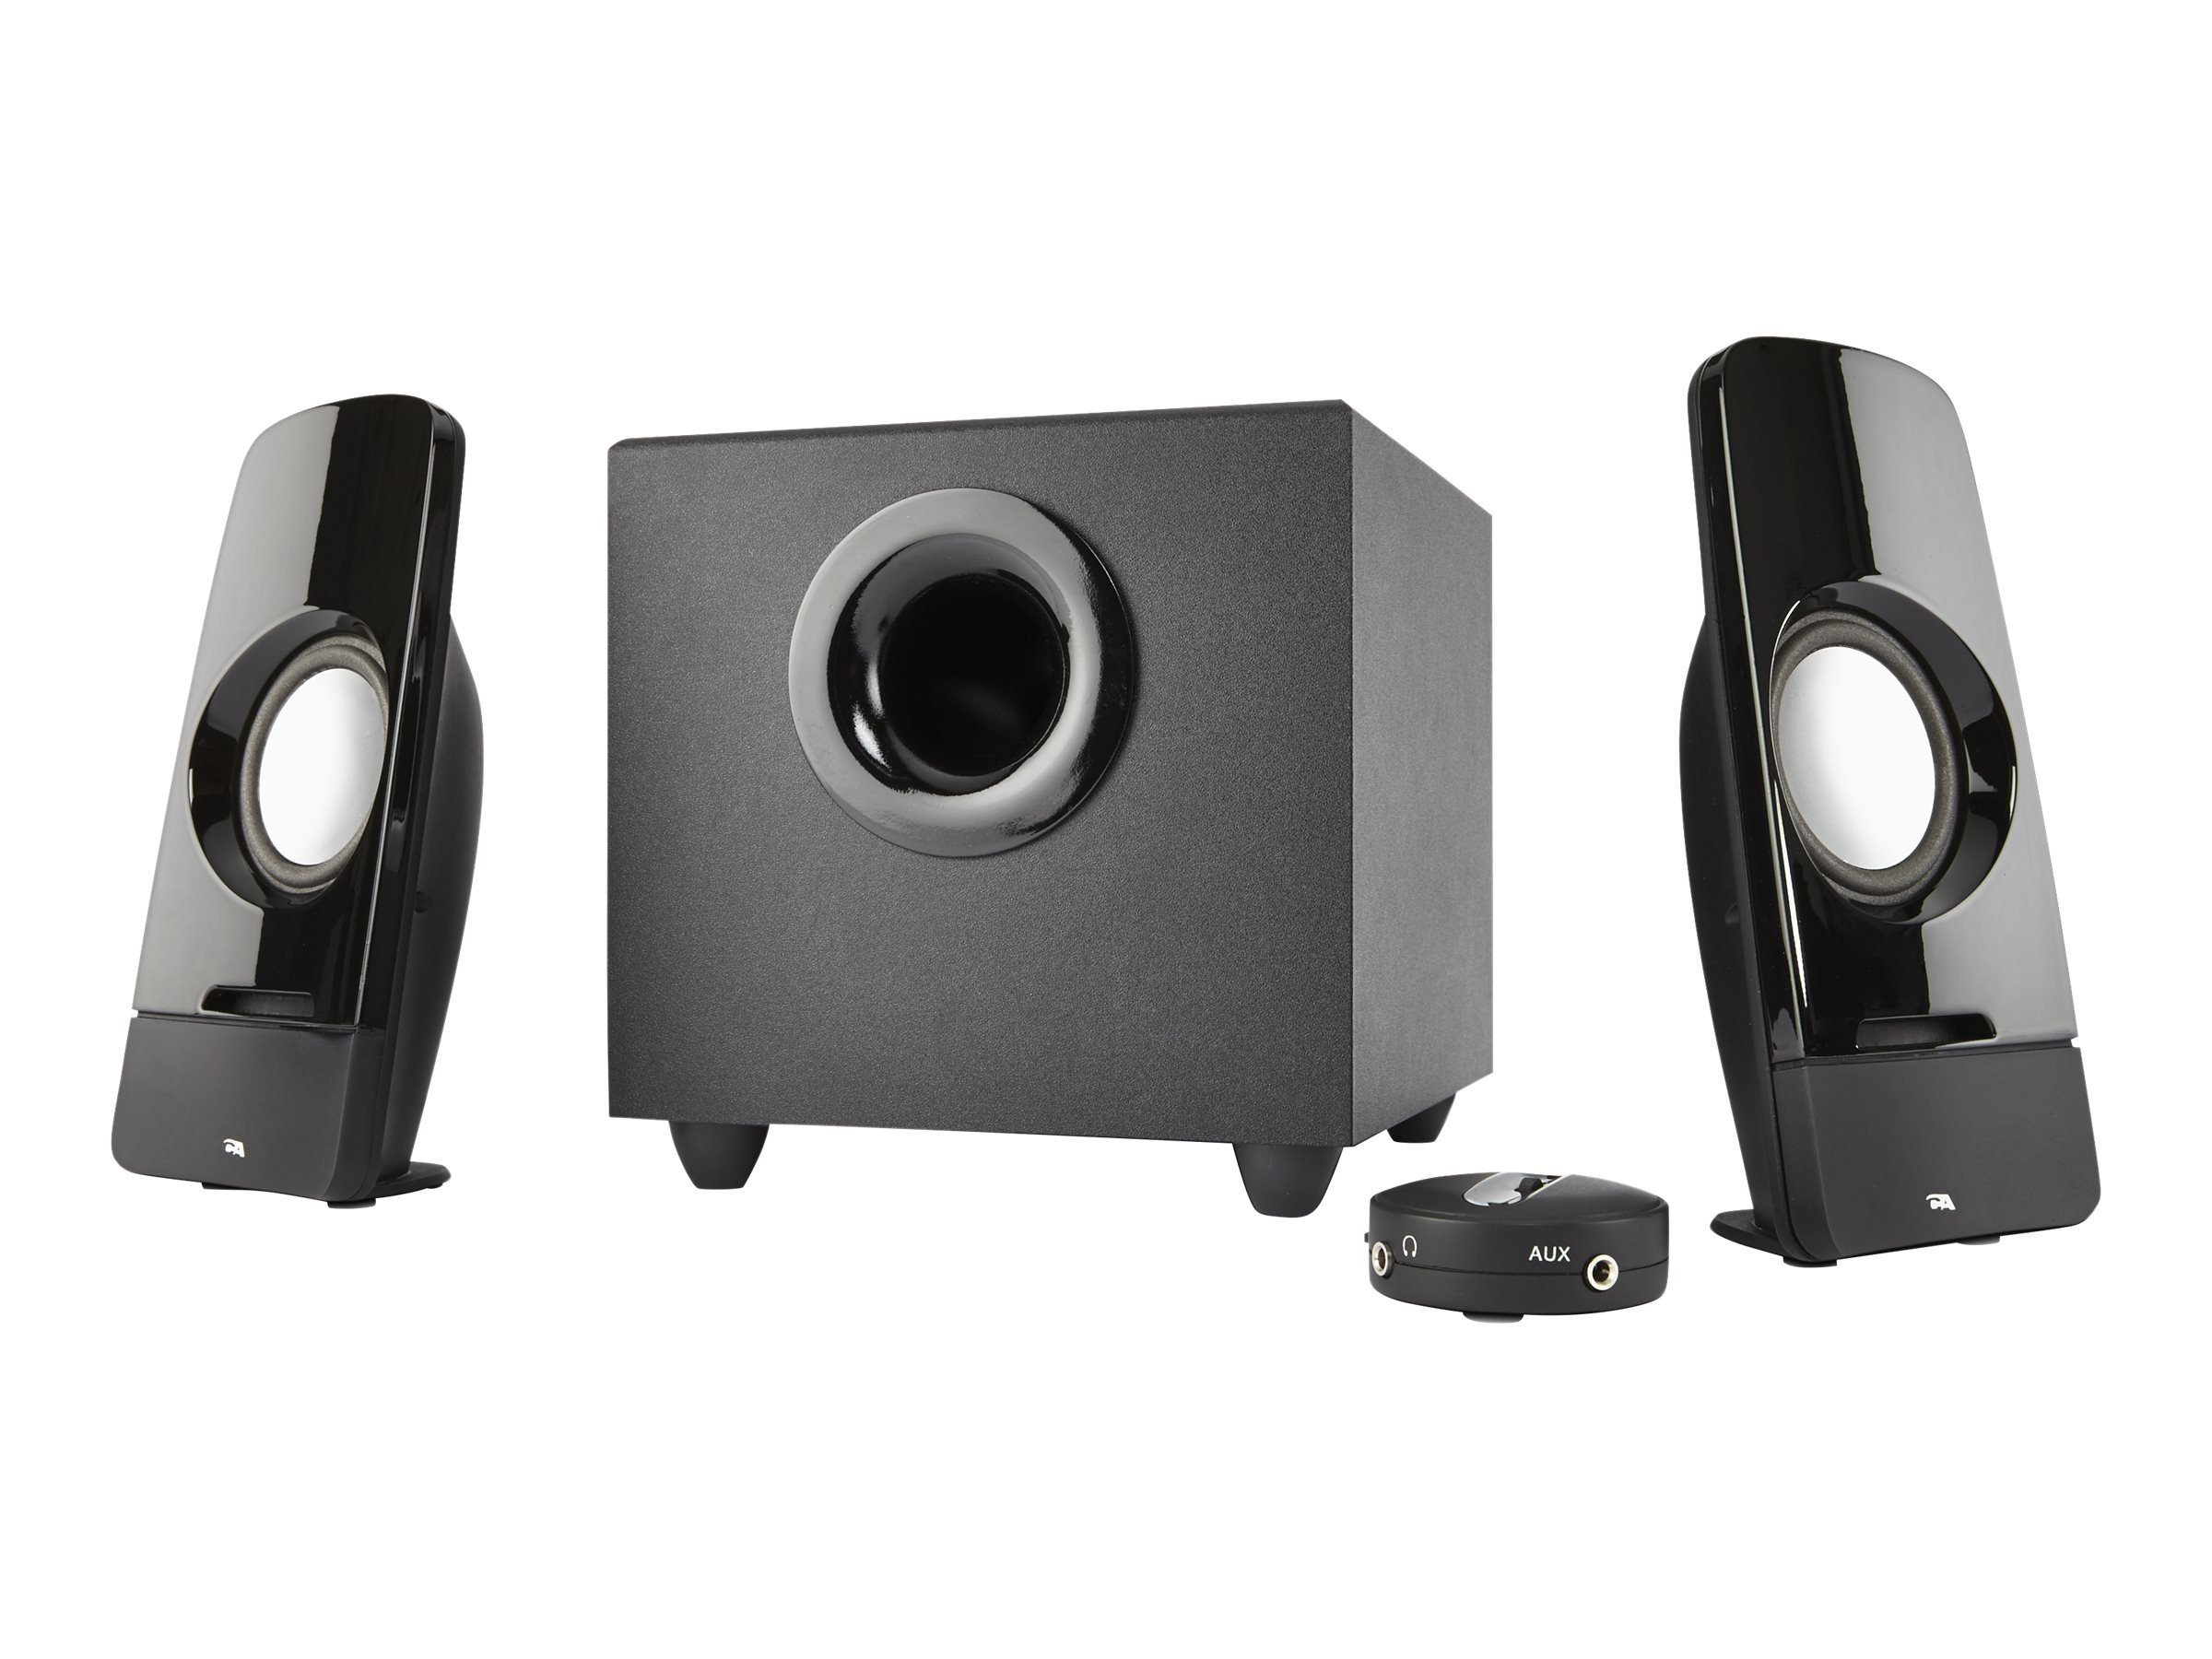 Cyber Acoustics Powerful Curve Series Storm 44W Speaker System with Control Pod (CA-3350) - image 1 of 2